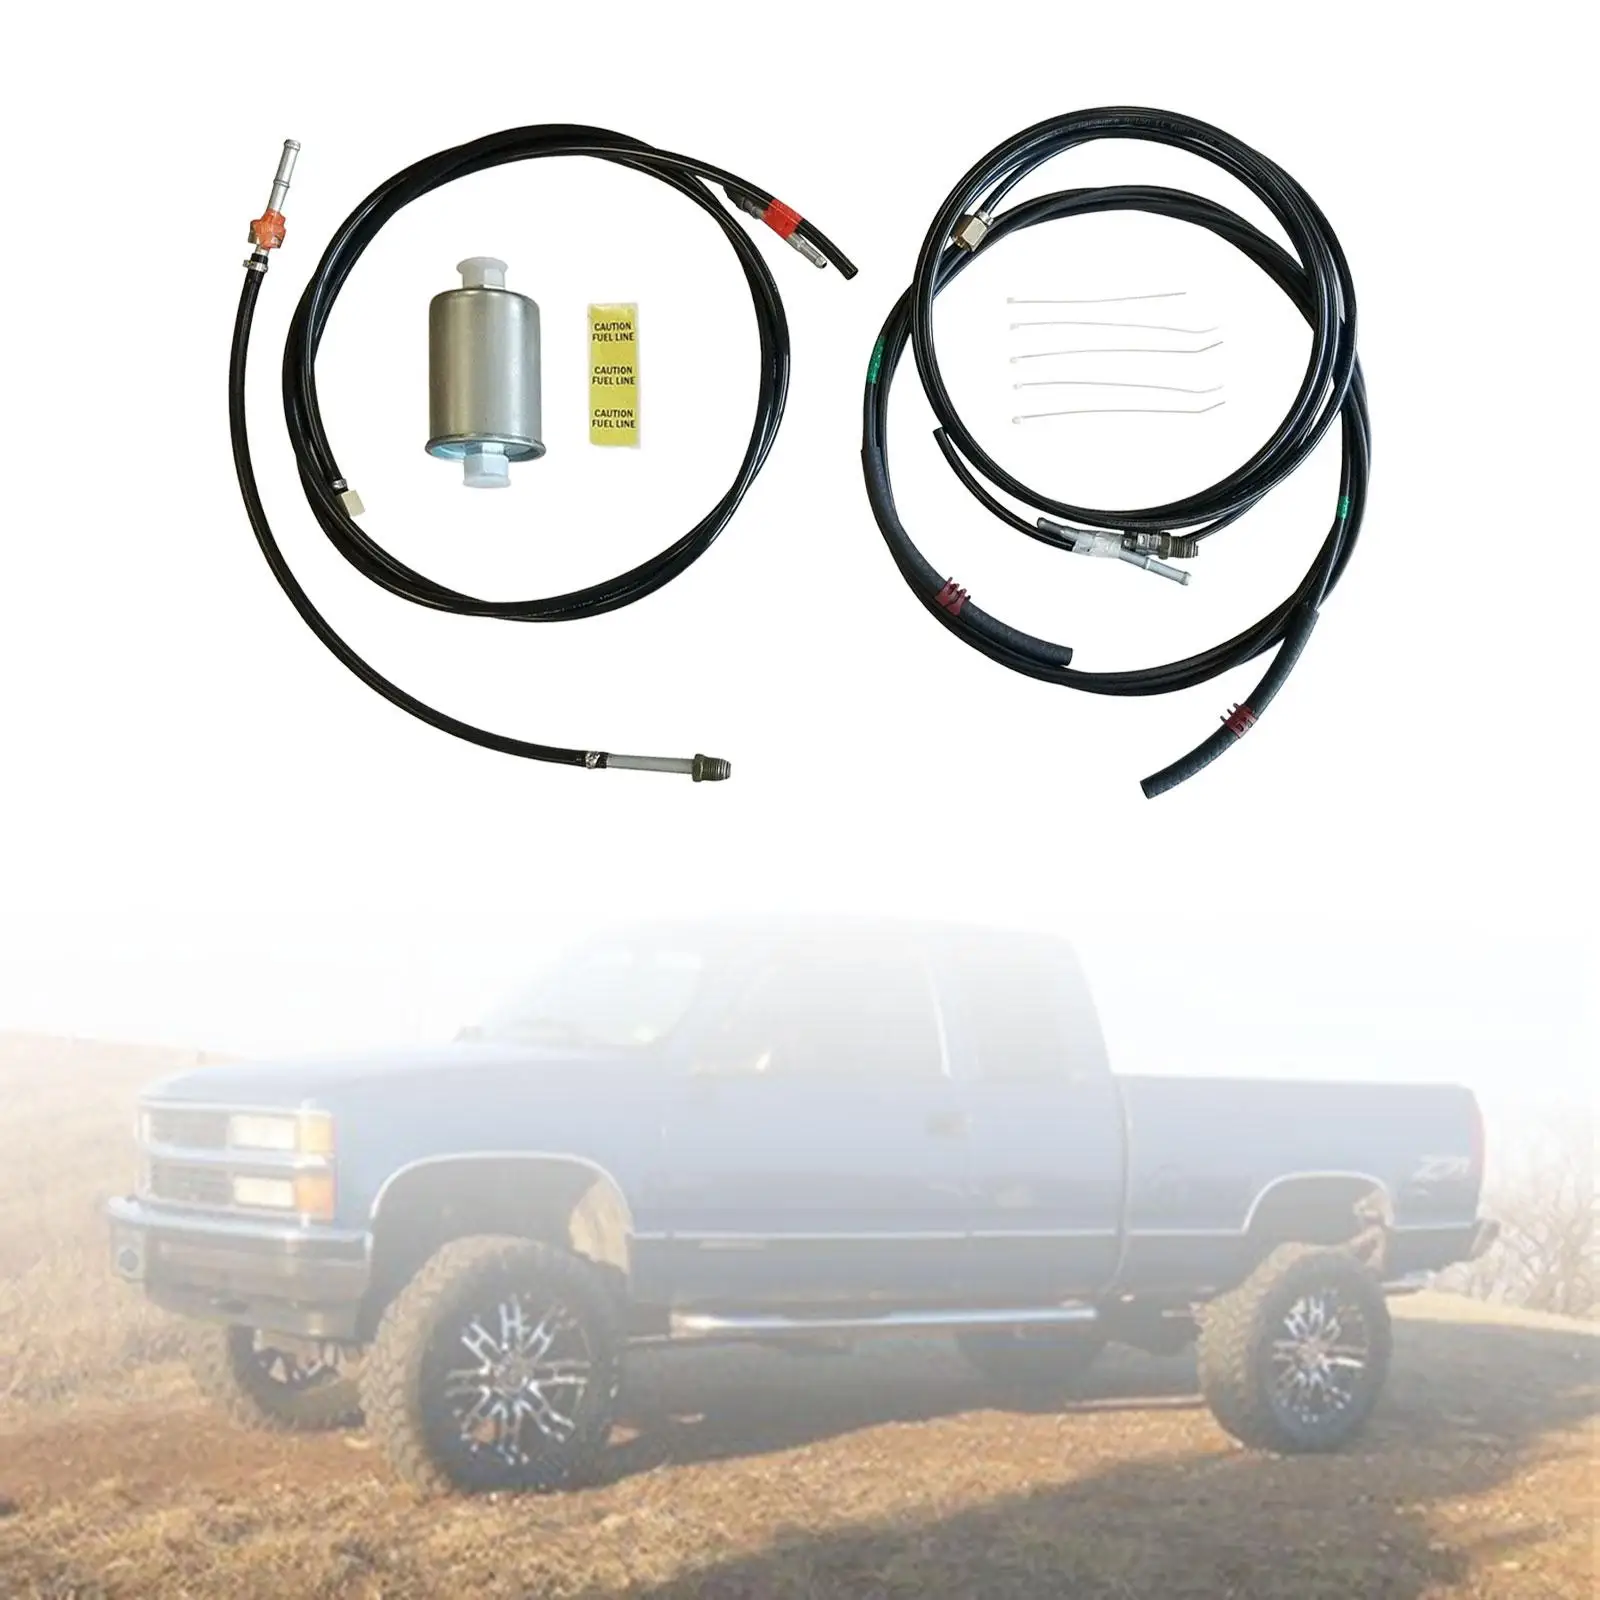 Fuel Lines Assembly Nfr0013 Automotive Parts for Chevrolet 1988-1997